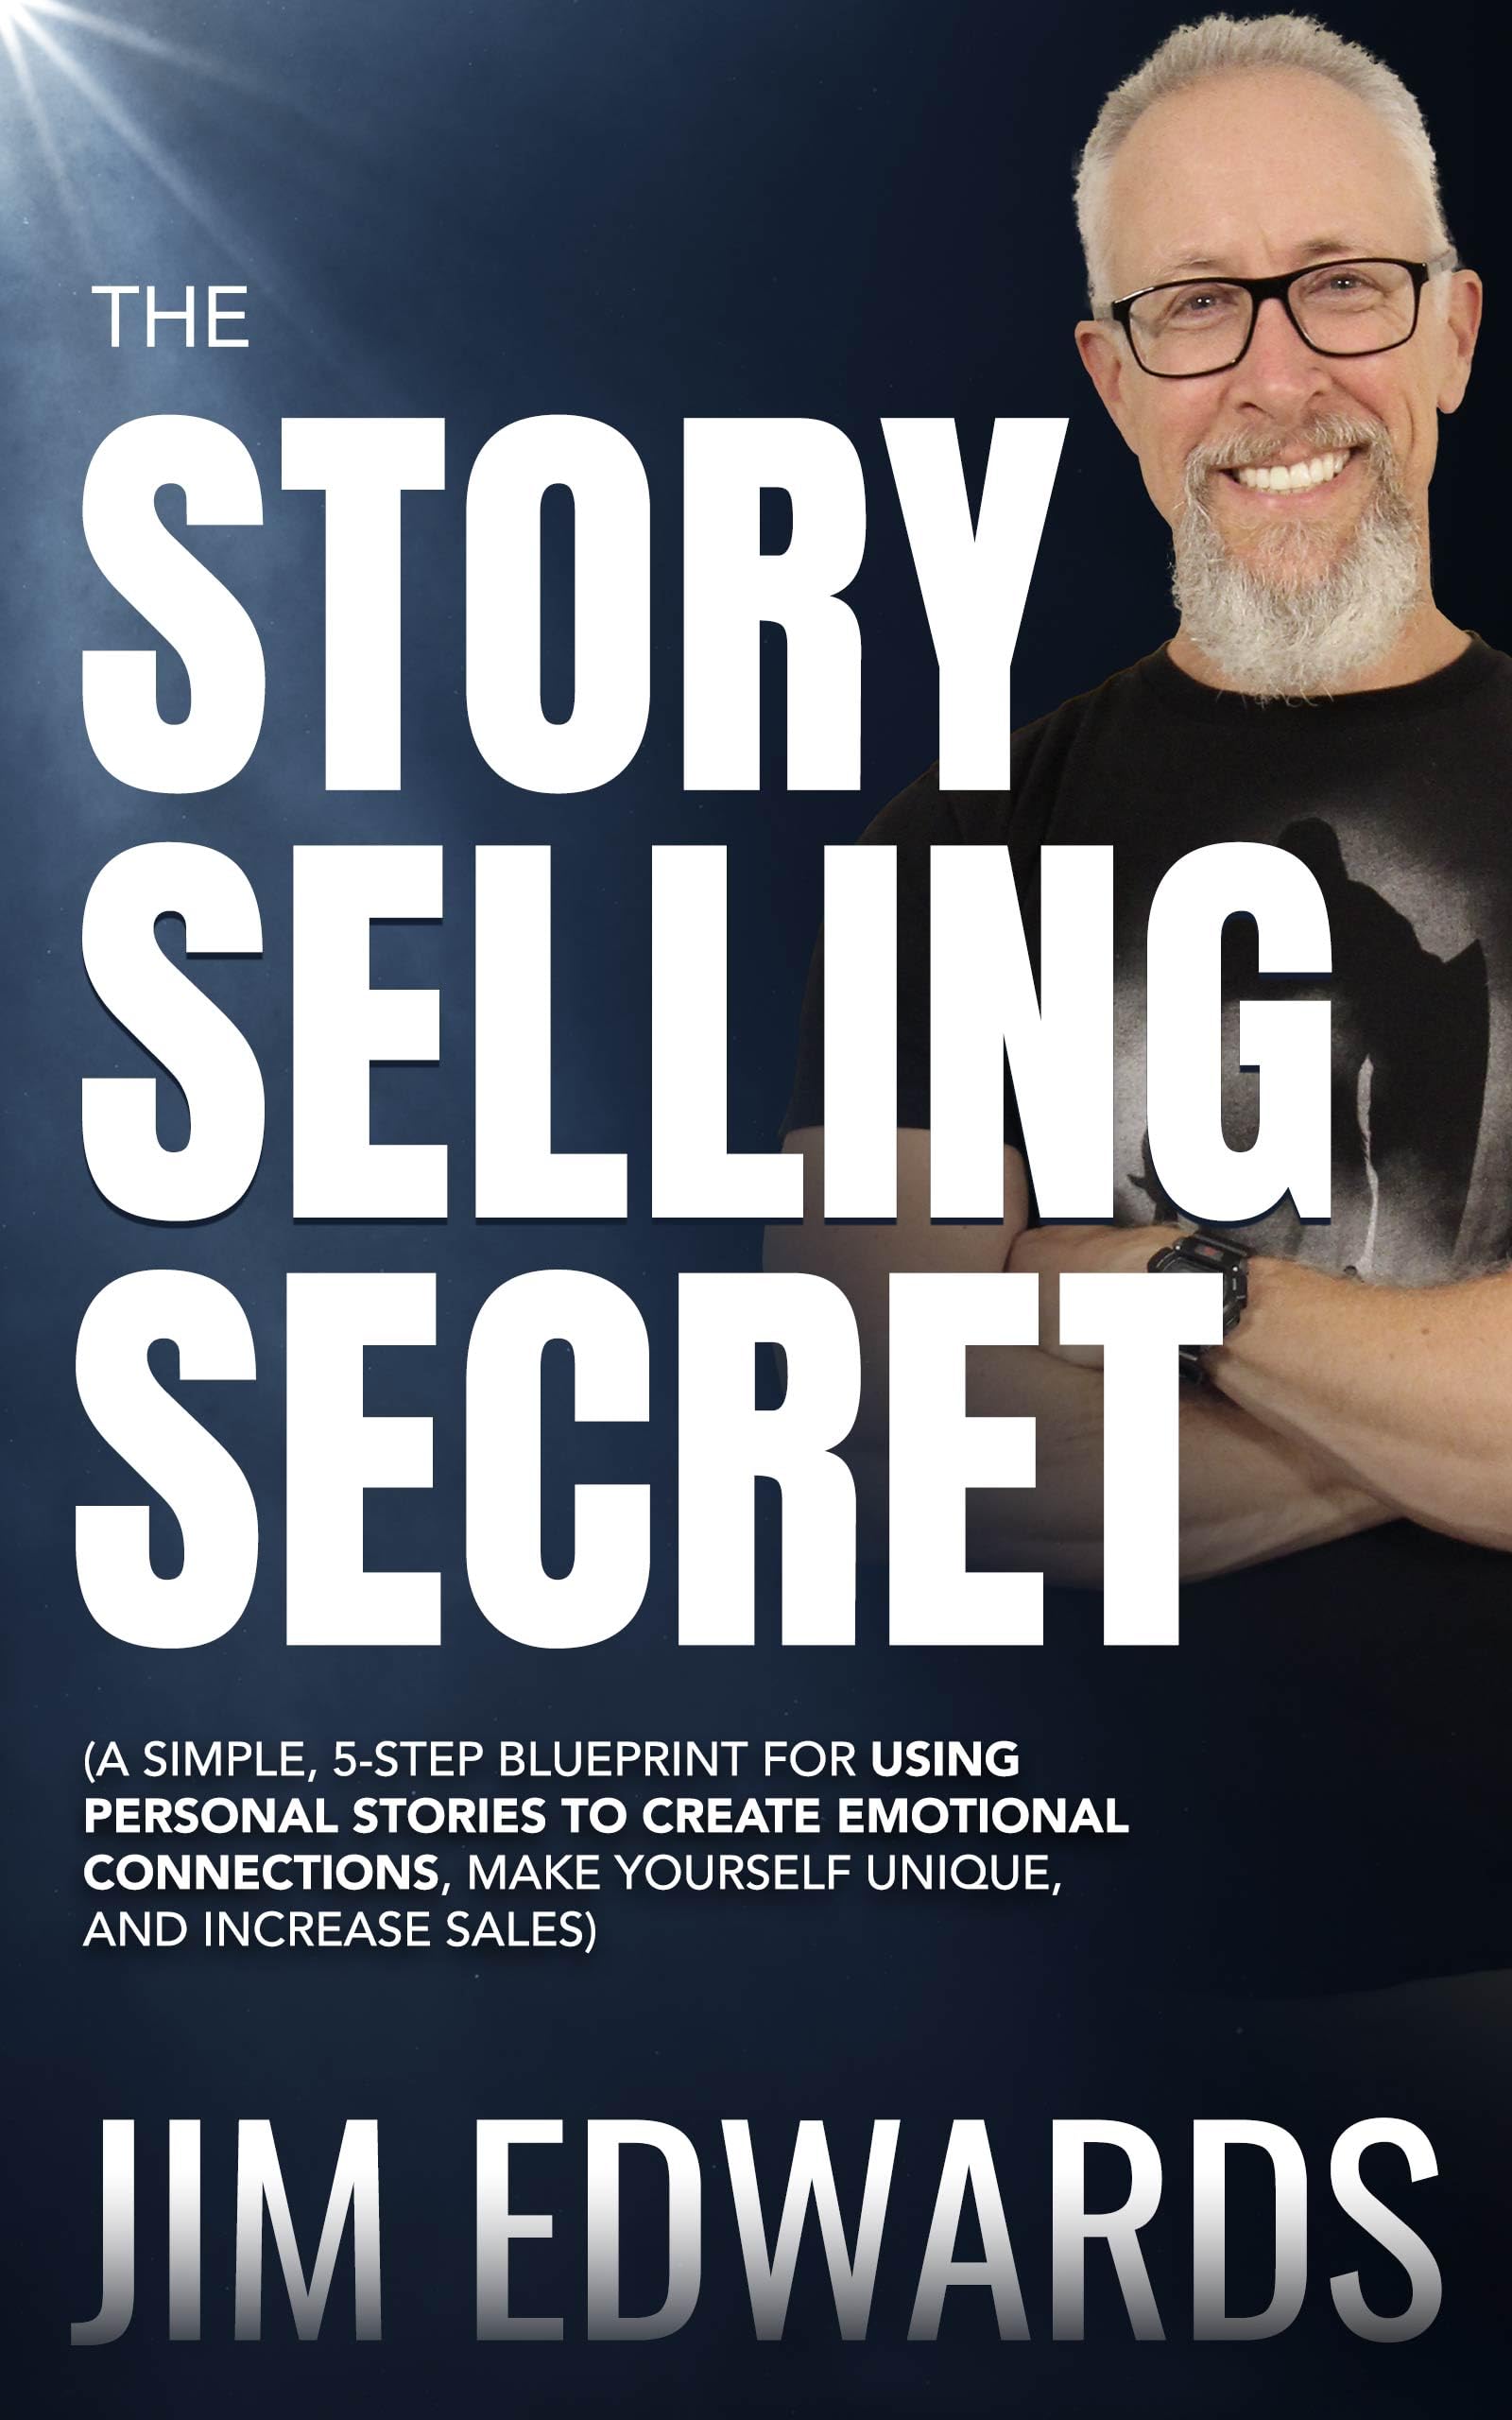 The Story Selling Secret: A Simple, 5-Step Blueprint For Using Personal Stories To Create Emotional Connections, Make Yourself Unique, and Increase Sales